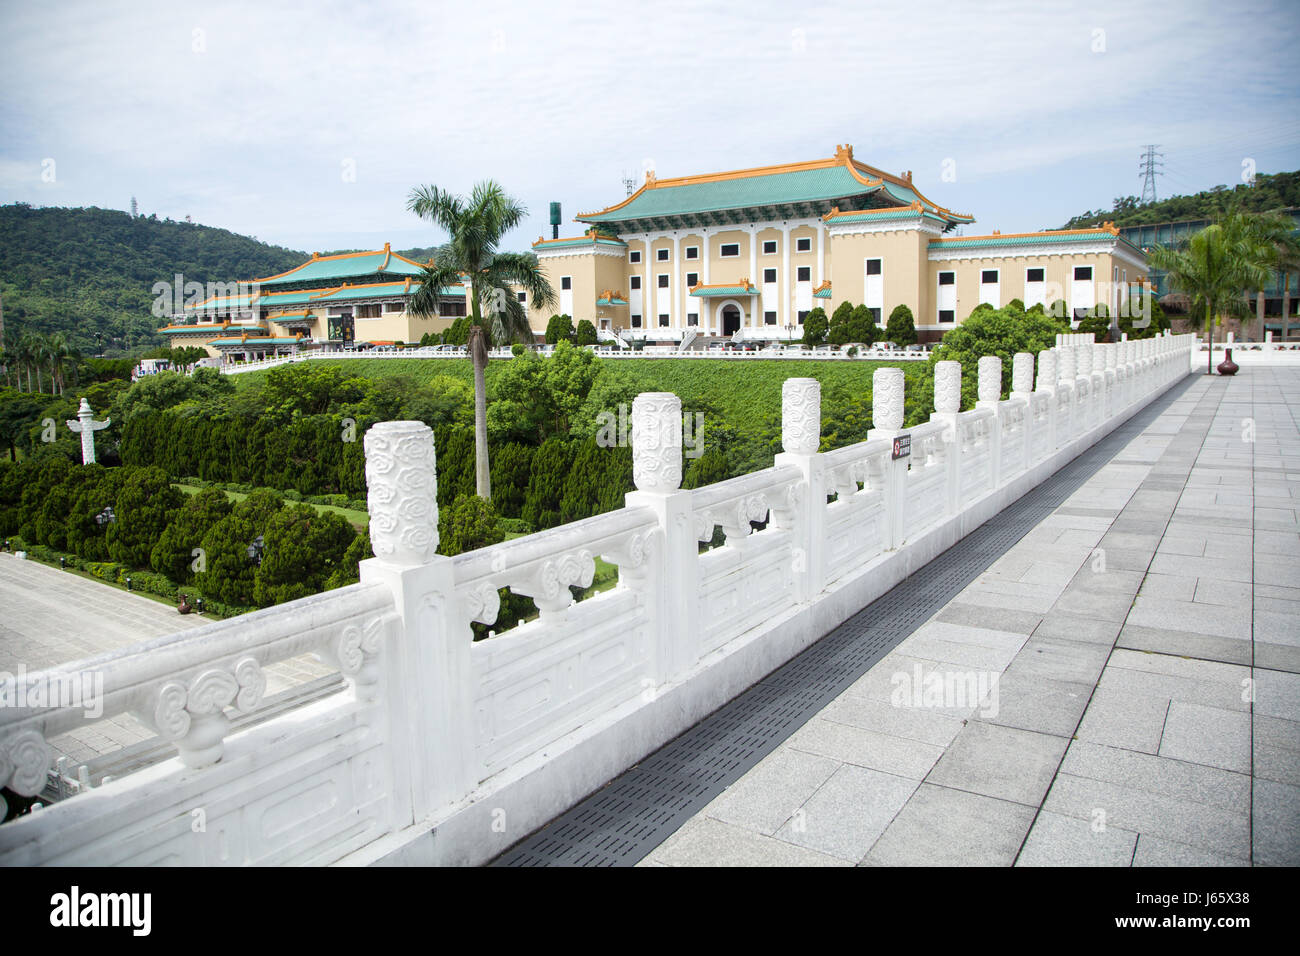 The Imperial Palace in Taipei, Taiwan Stock Photo